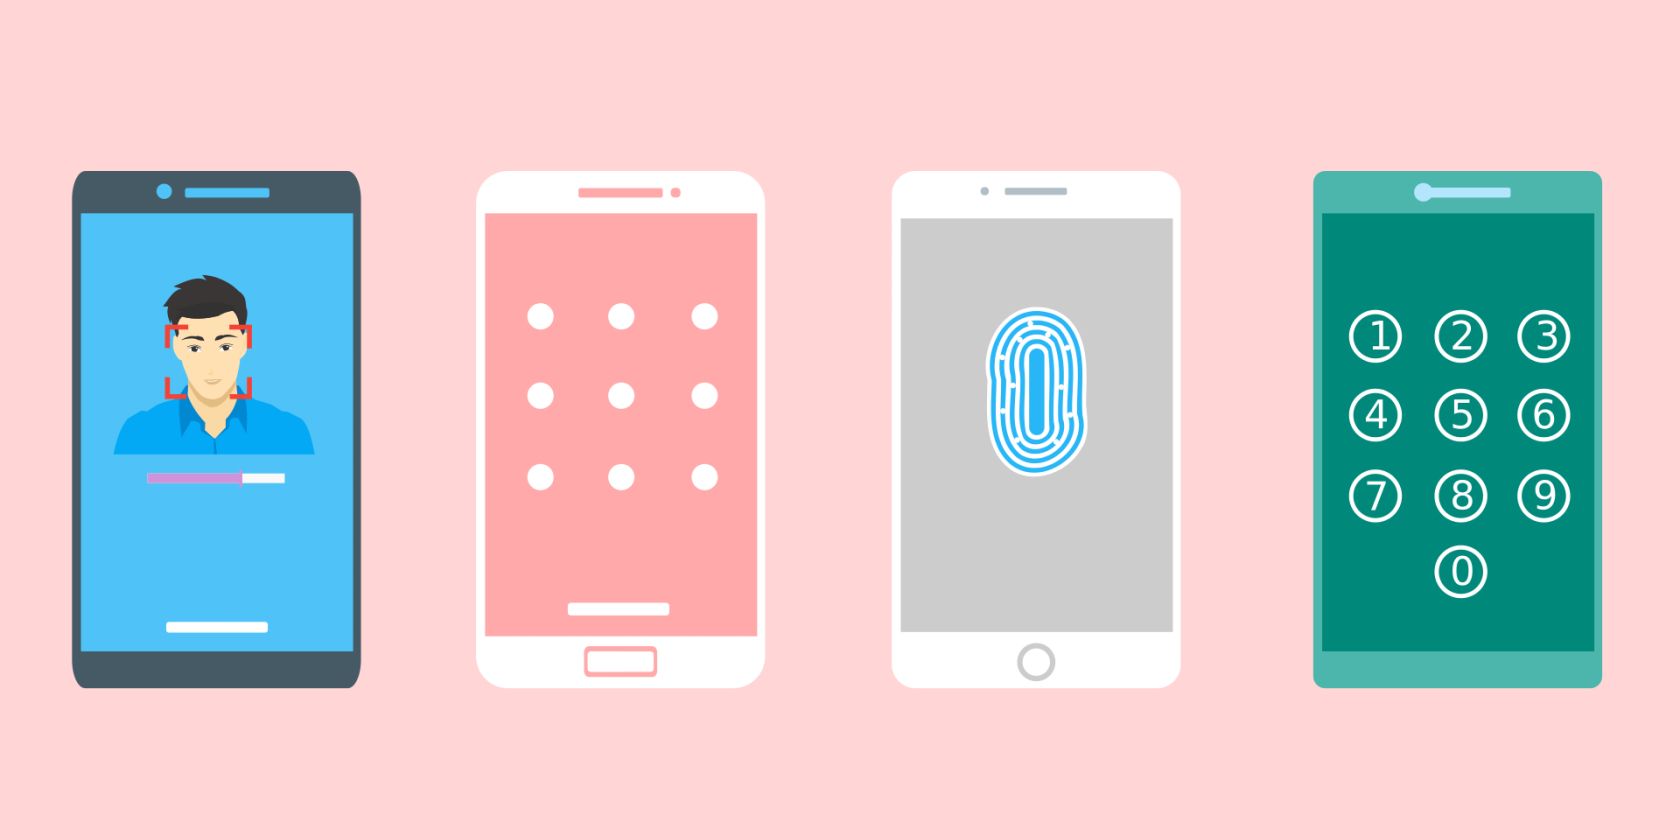 Graphic representations of security features on several phones